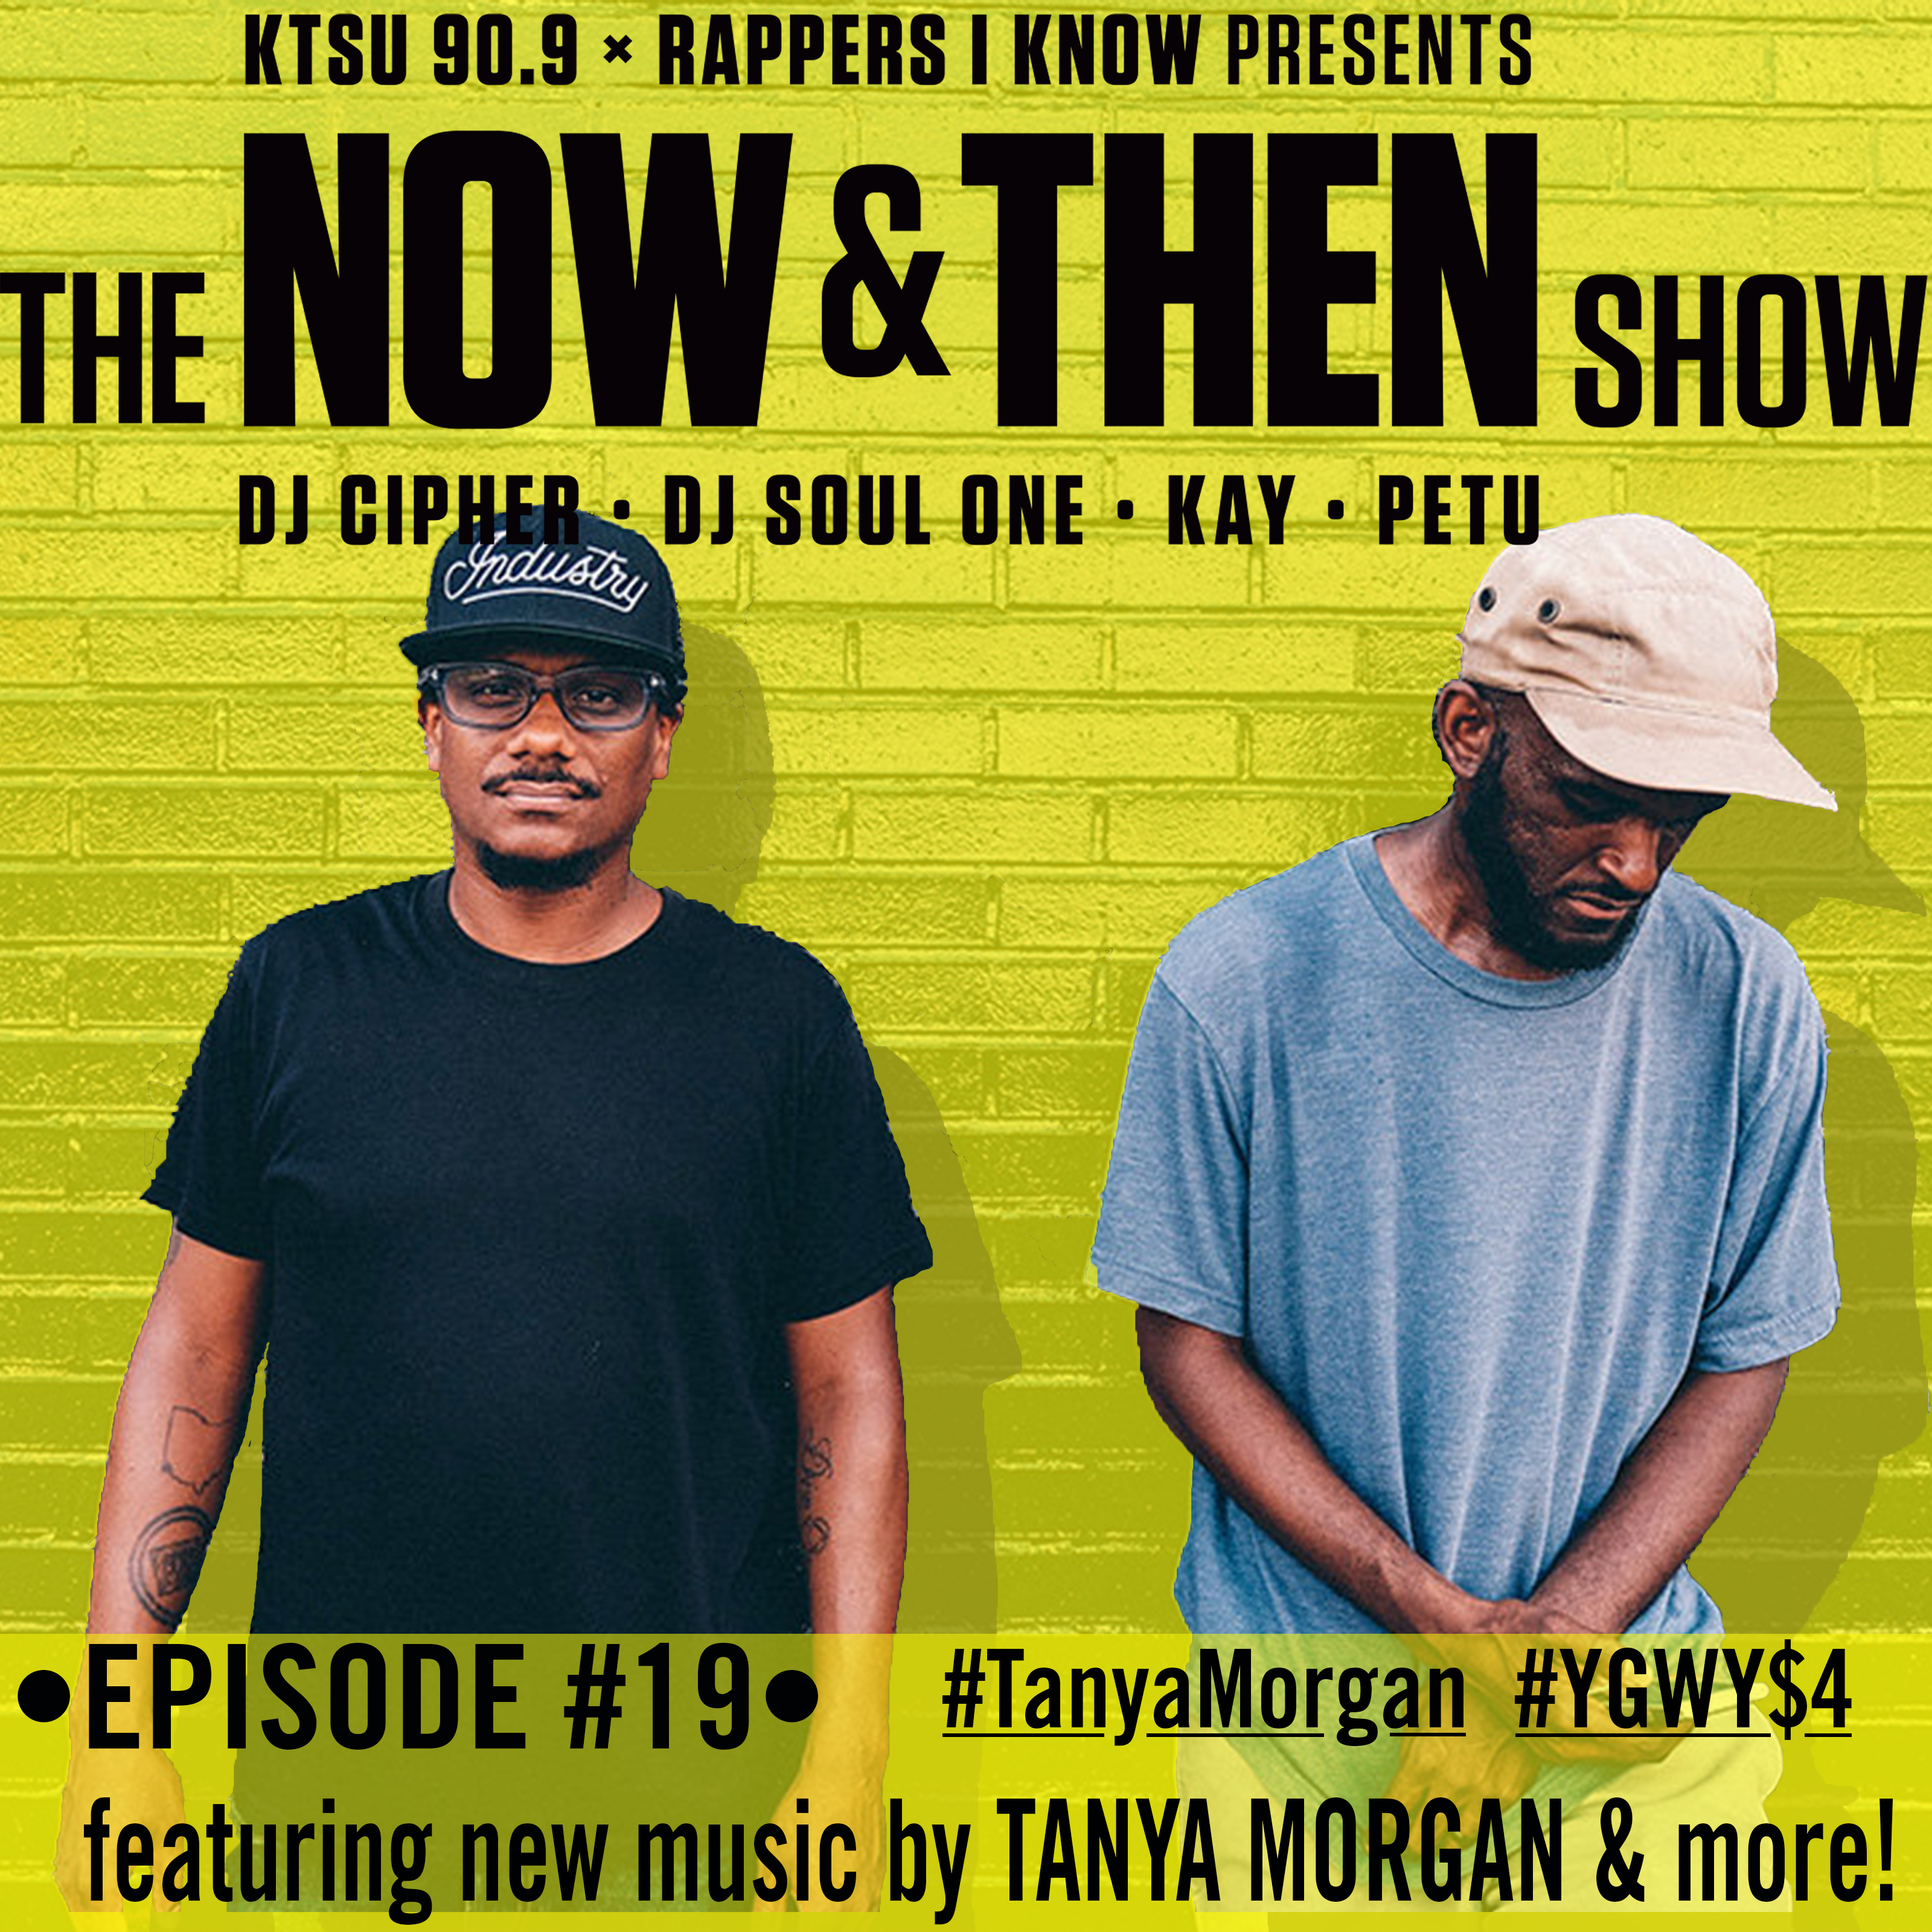 The Now & Then Show #019-Tanya Morgan YGWY$4 Discussion